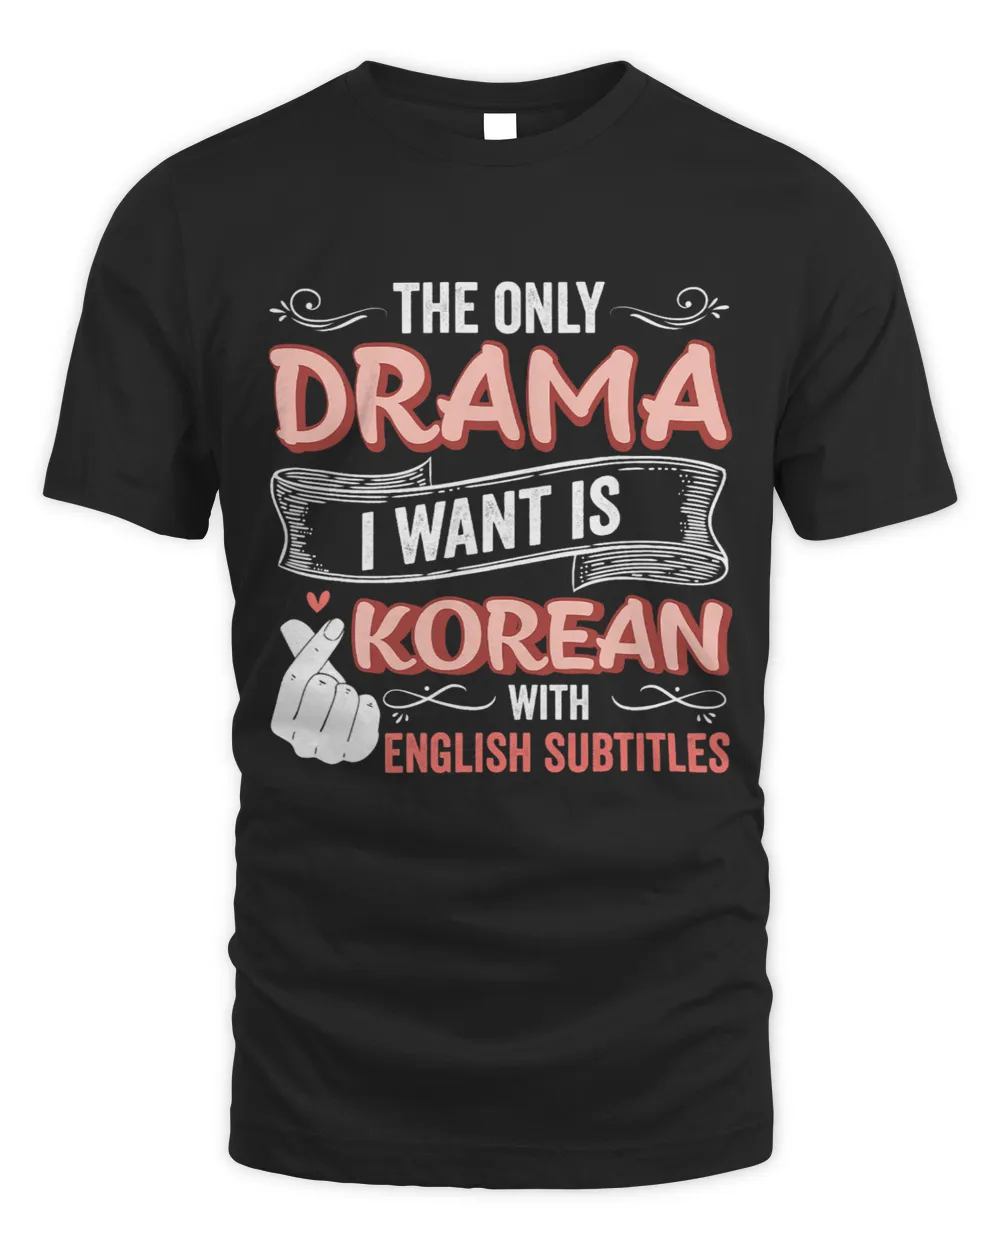 The Only Drama I Want Is Korean With English Subtitles Kpop